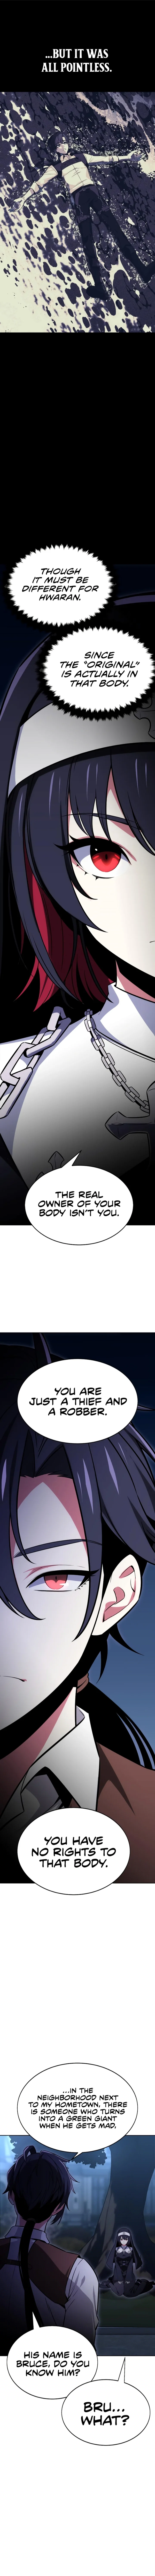 I Killed an Academy Player - Chapter 8 Page 3